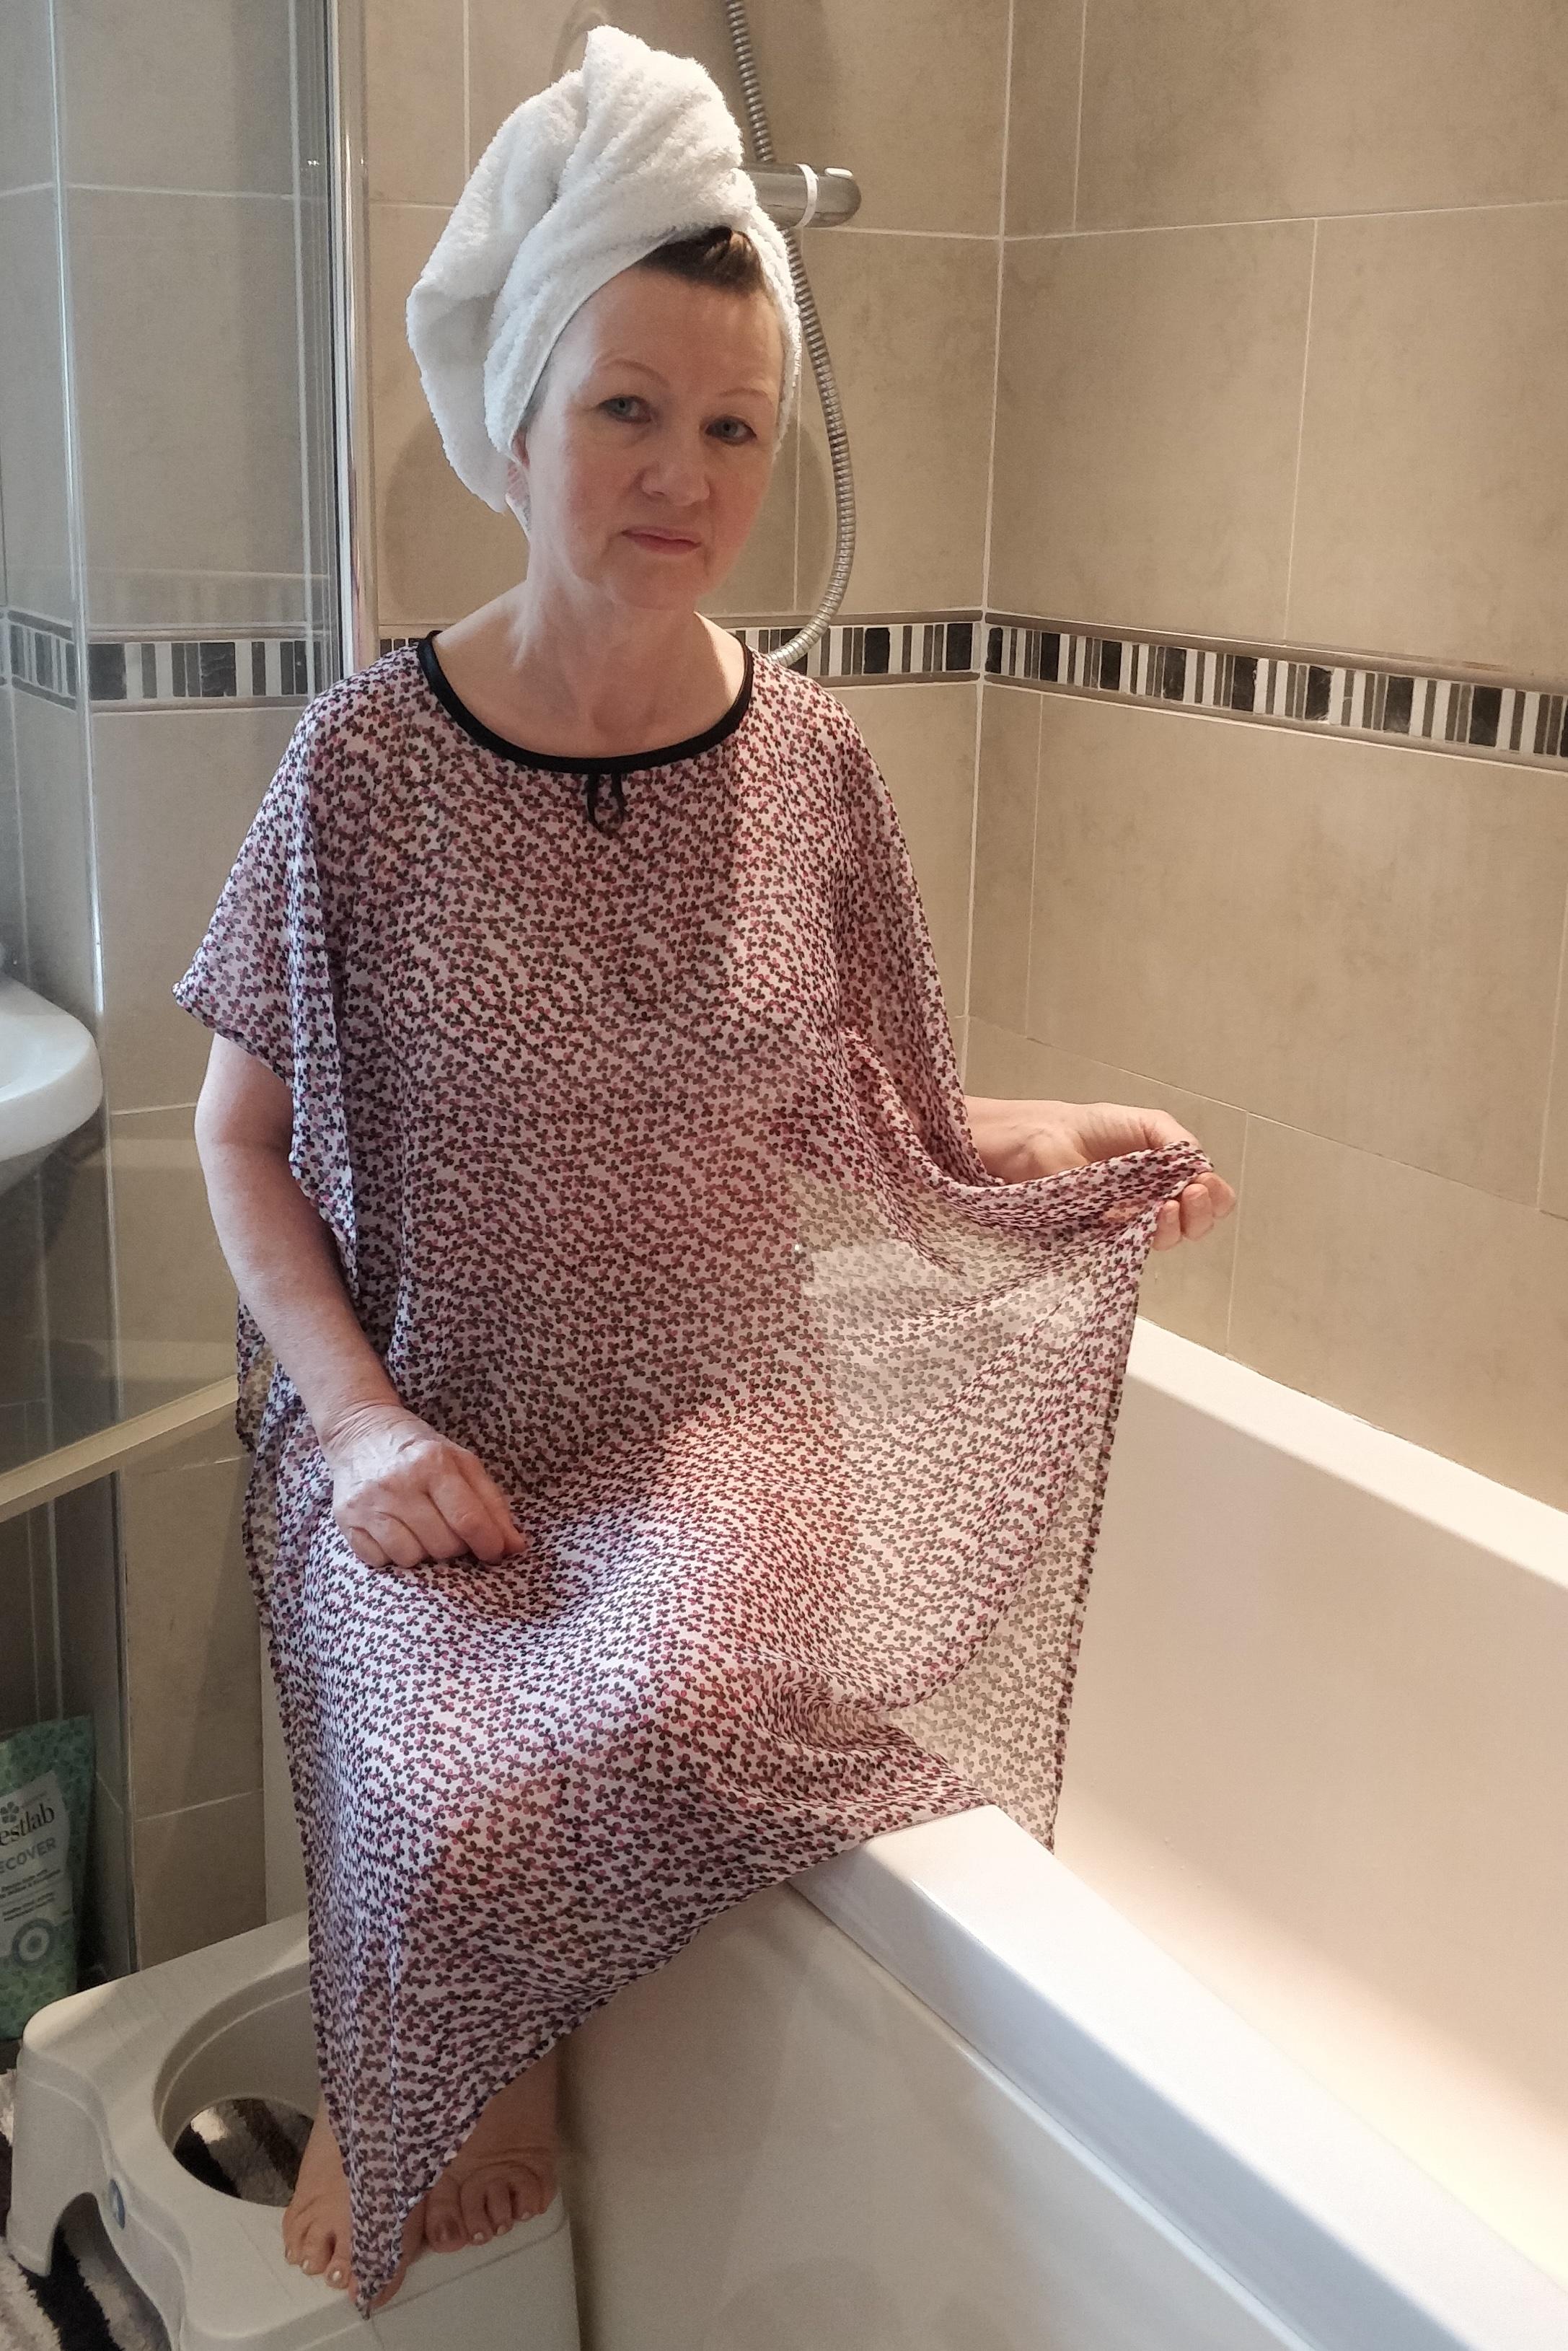 Ditsy print NeverNaked(tm) Shower Drapron® to provide modesty, dignity and privacy whilst being helped to shower or bathe. Shower modesty wear. Bathing modesty gown. Lightweight crepe chiffon. Slips over shoulders - No sleeves. Magnetic fastening at back